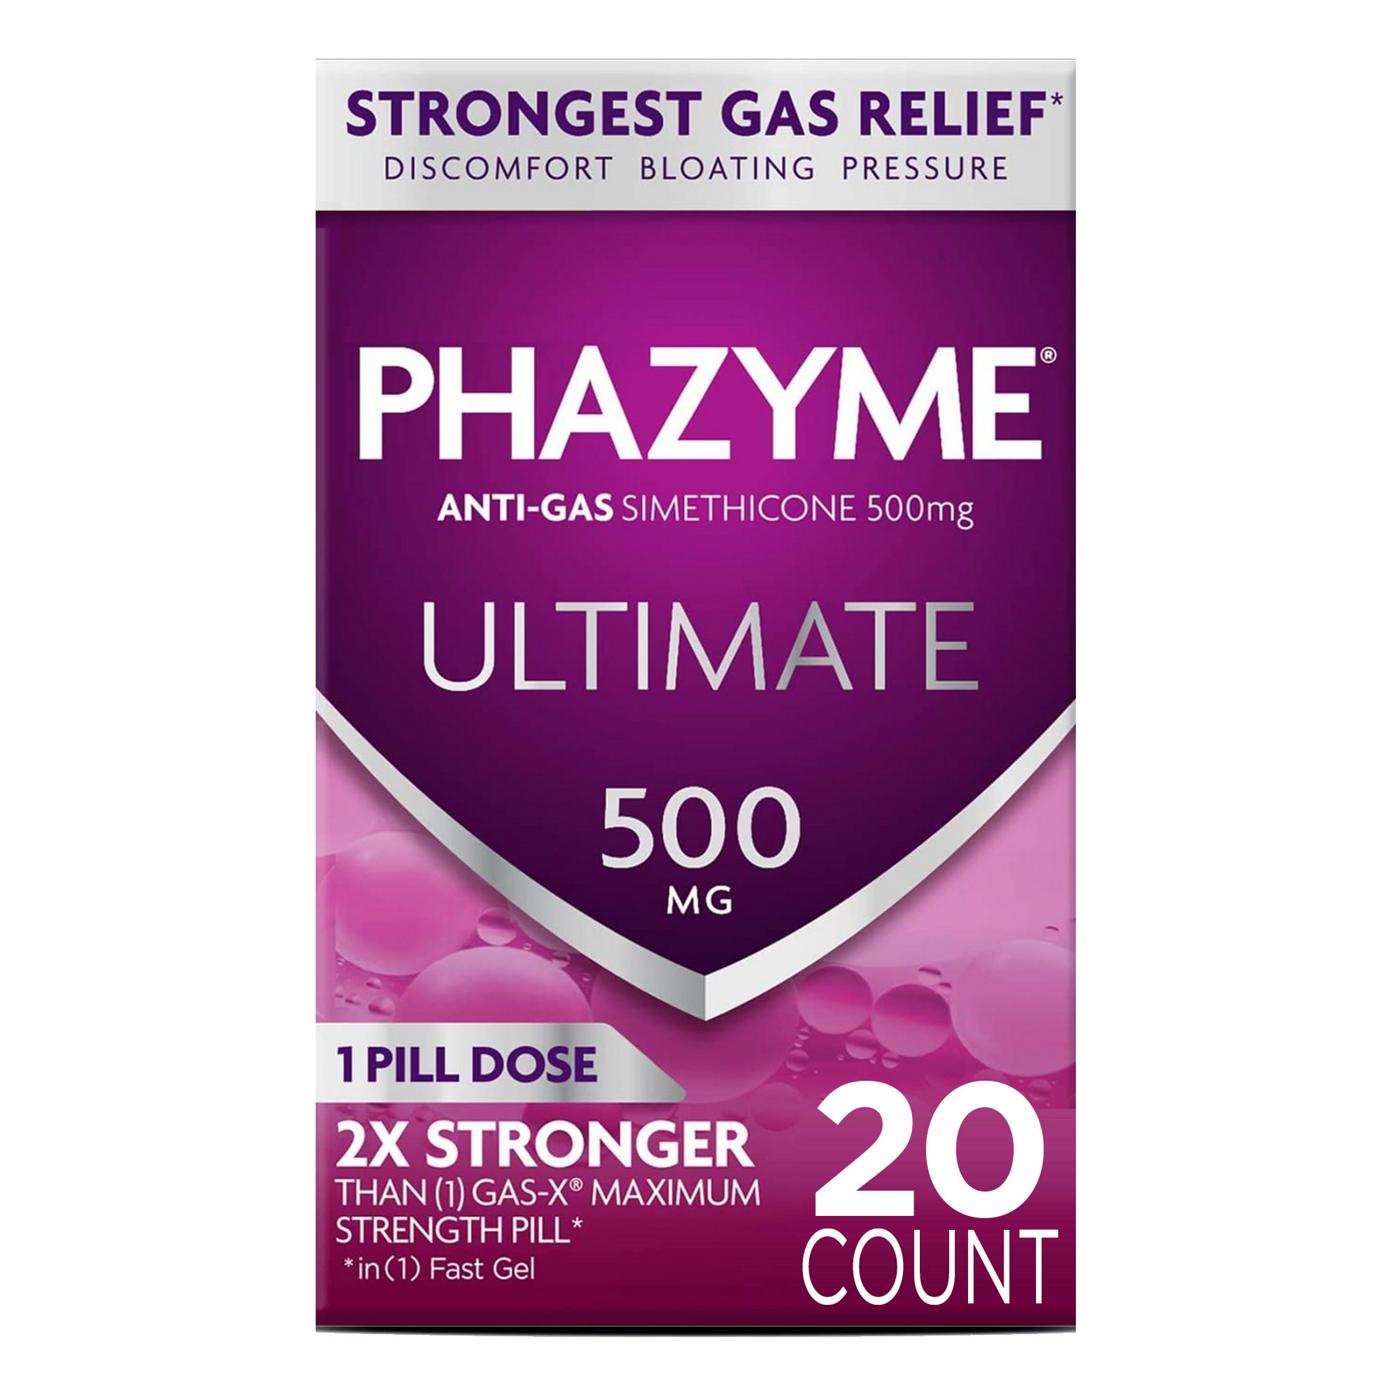 Phazyme Ultimate Gas & Bloating Relief; image 1 of 5